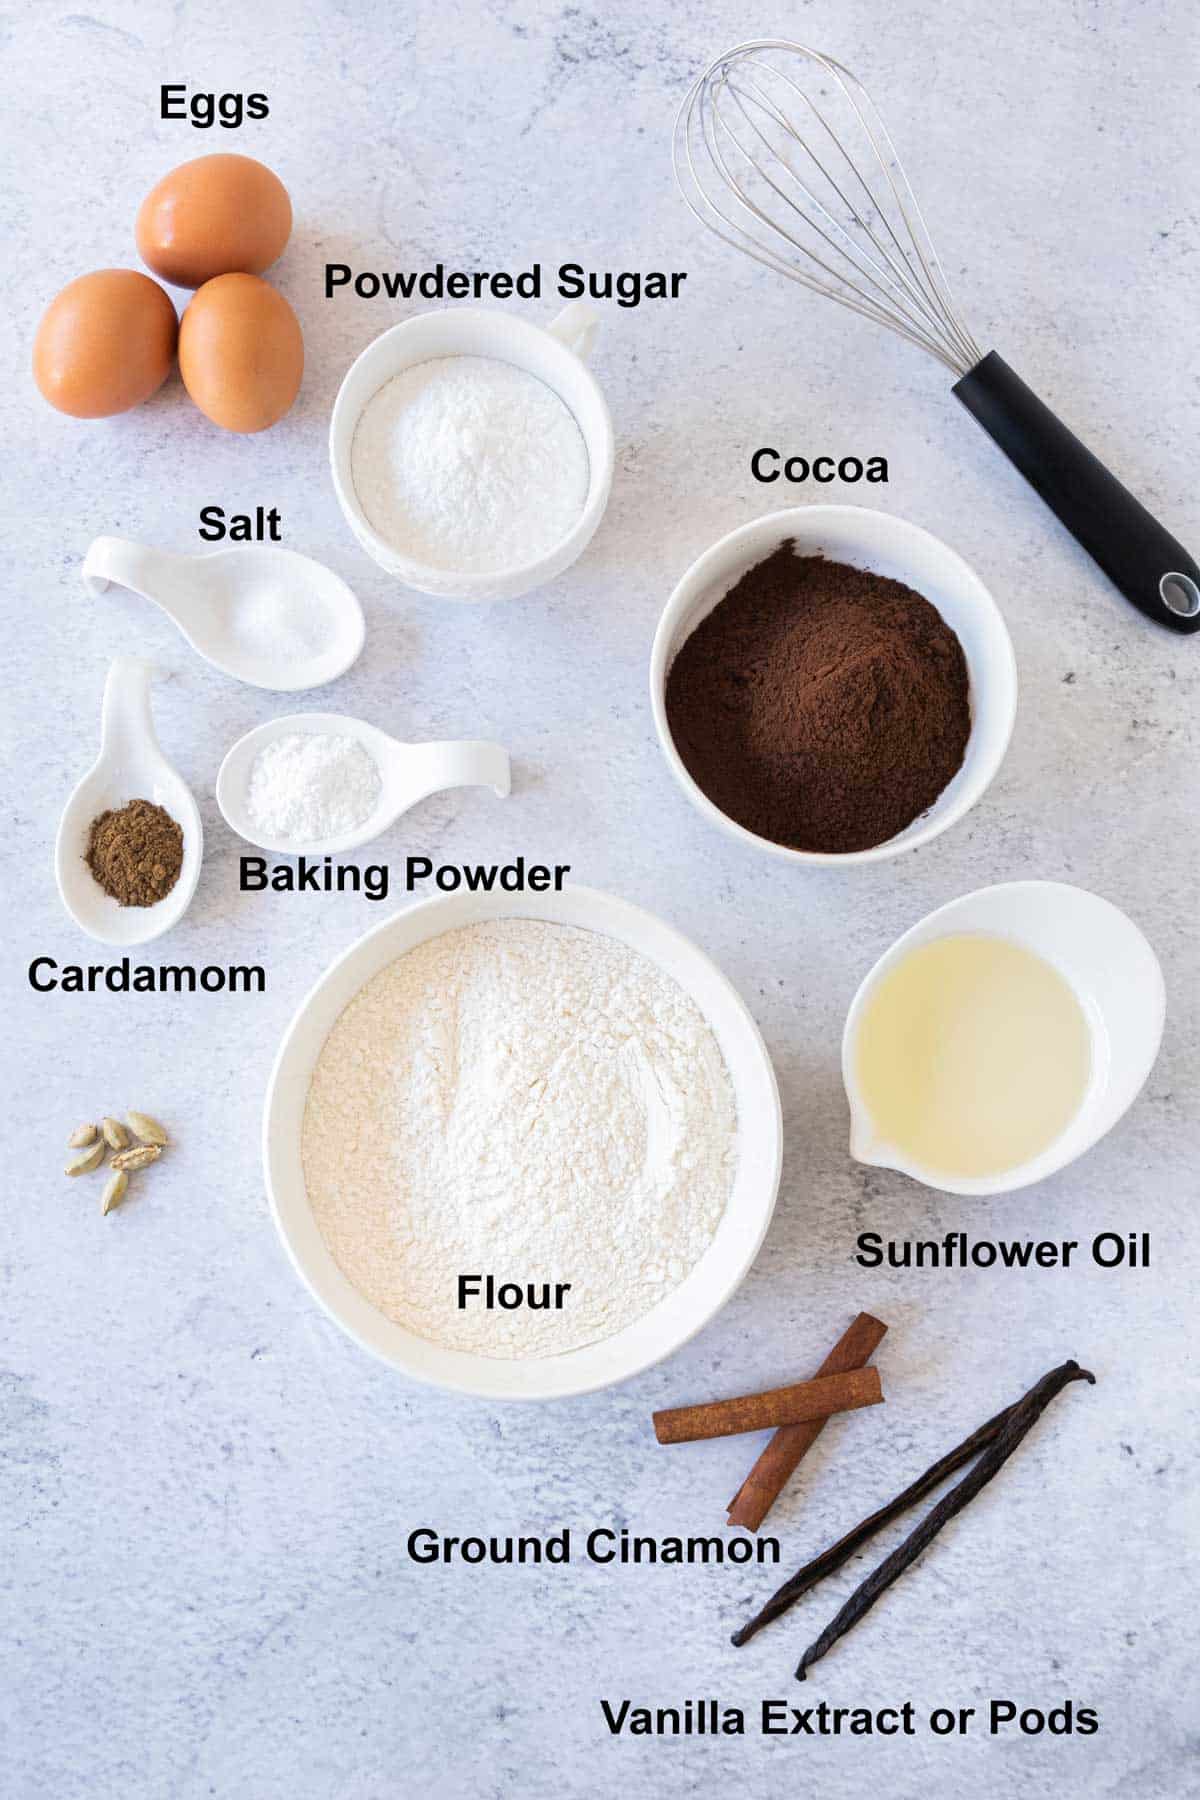 The ingredients for chocolate snowball cookies on a white background.